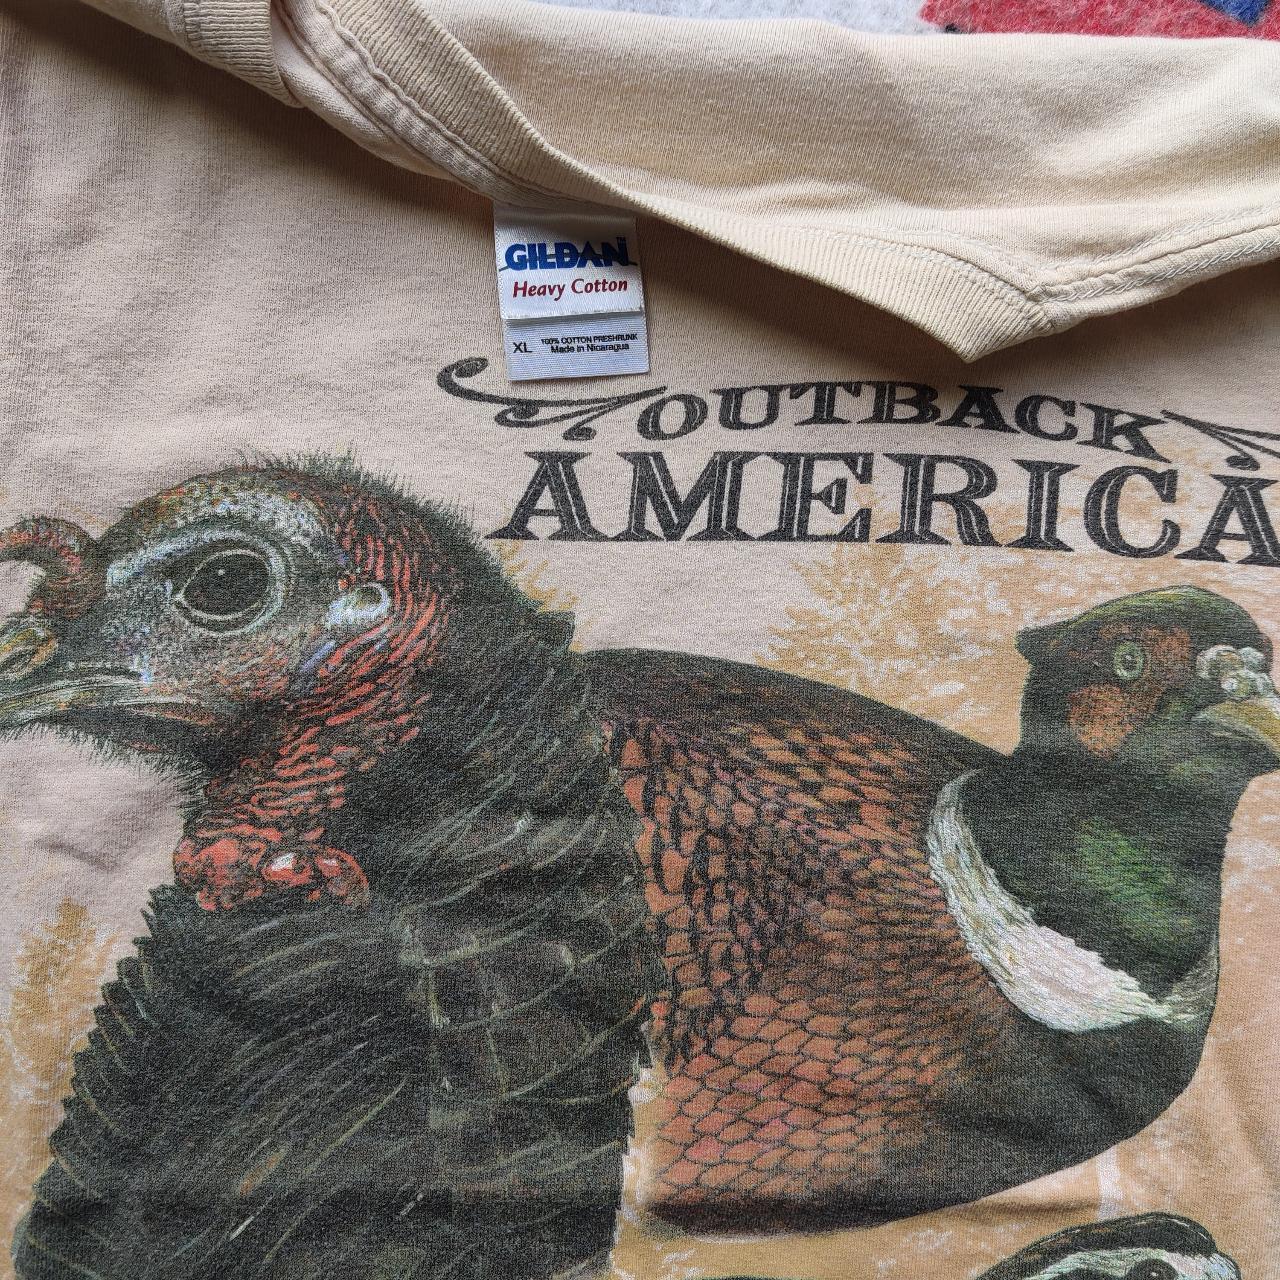 Product Image 3 - Vintage Outback America T-Shirt
Used in